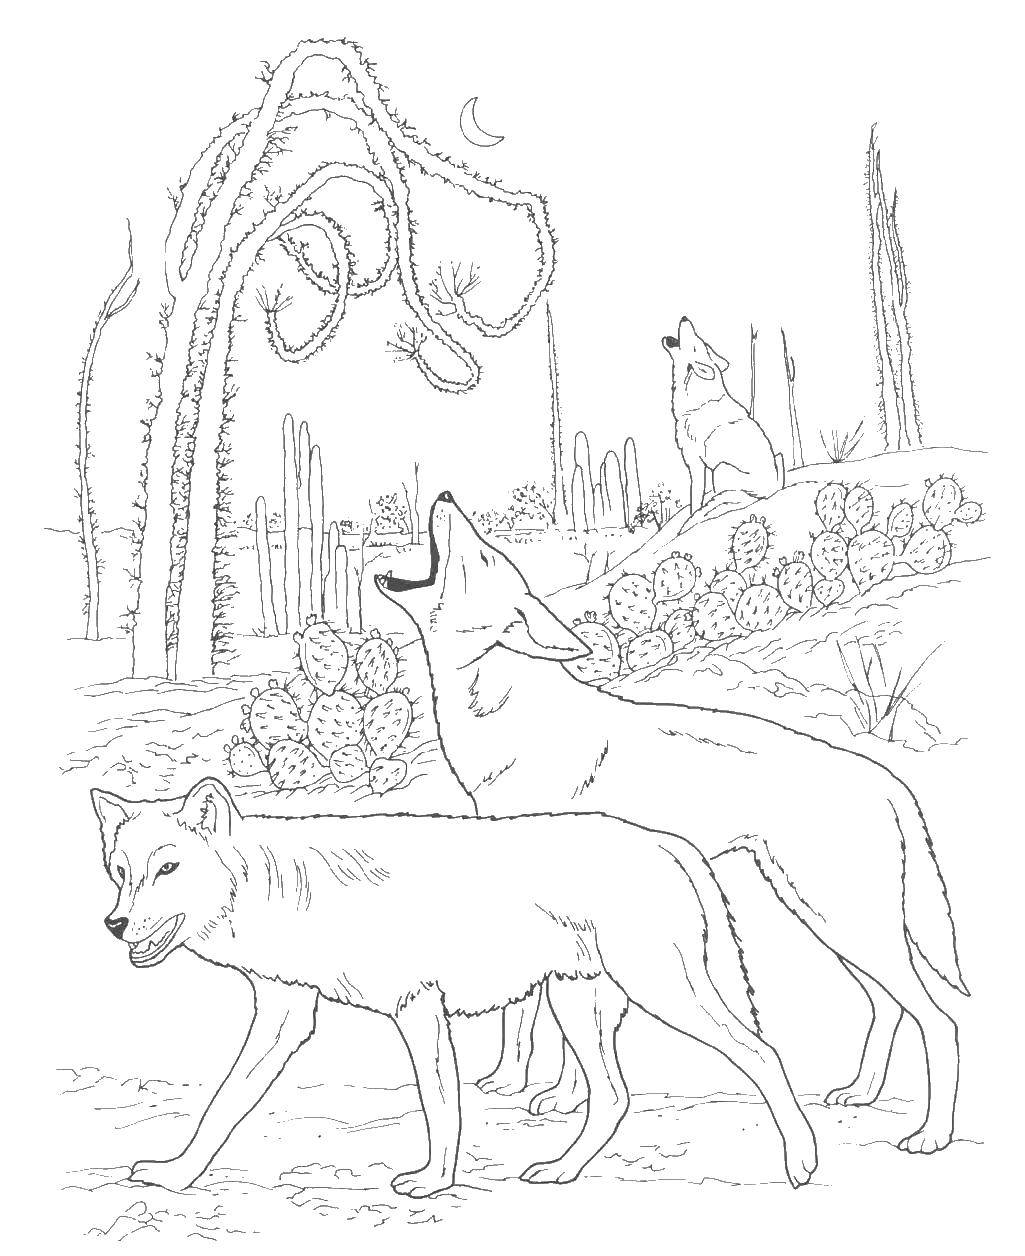 Coloring Wolves. Category wolf. Tags:  wolf.